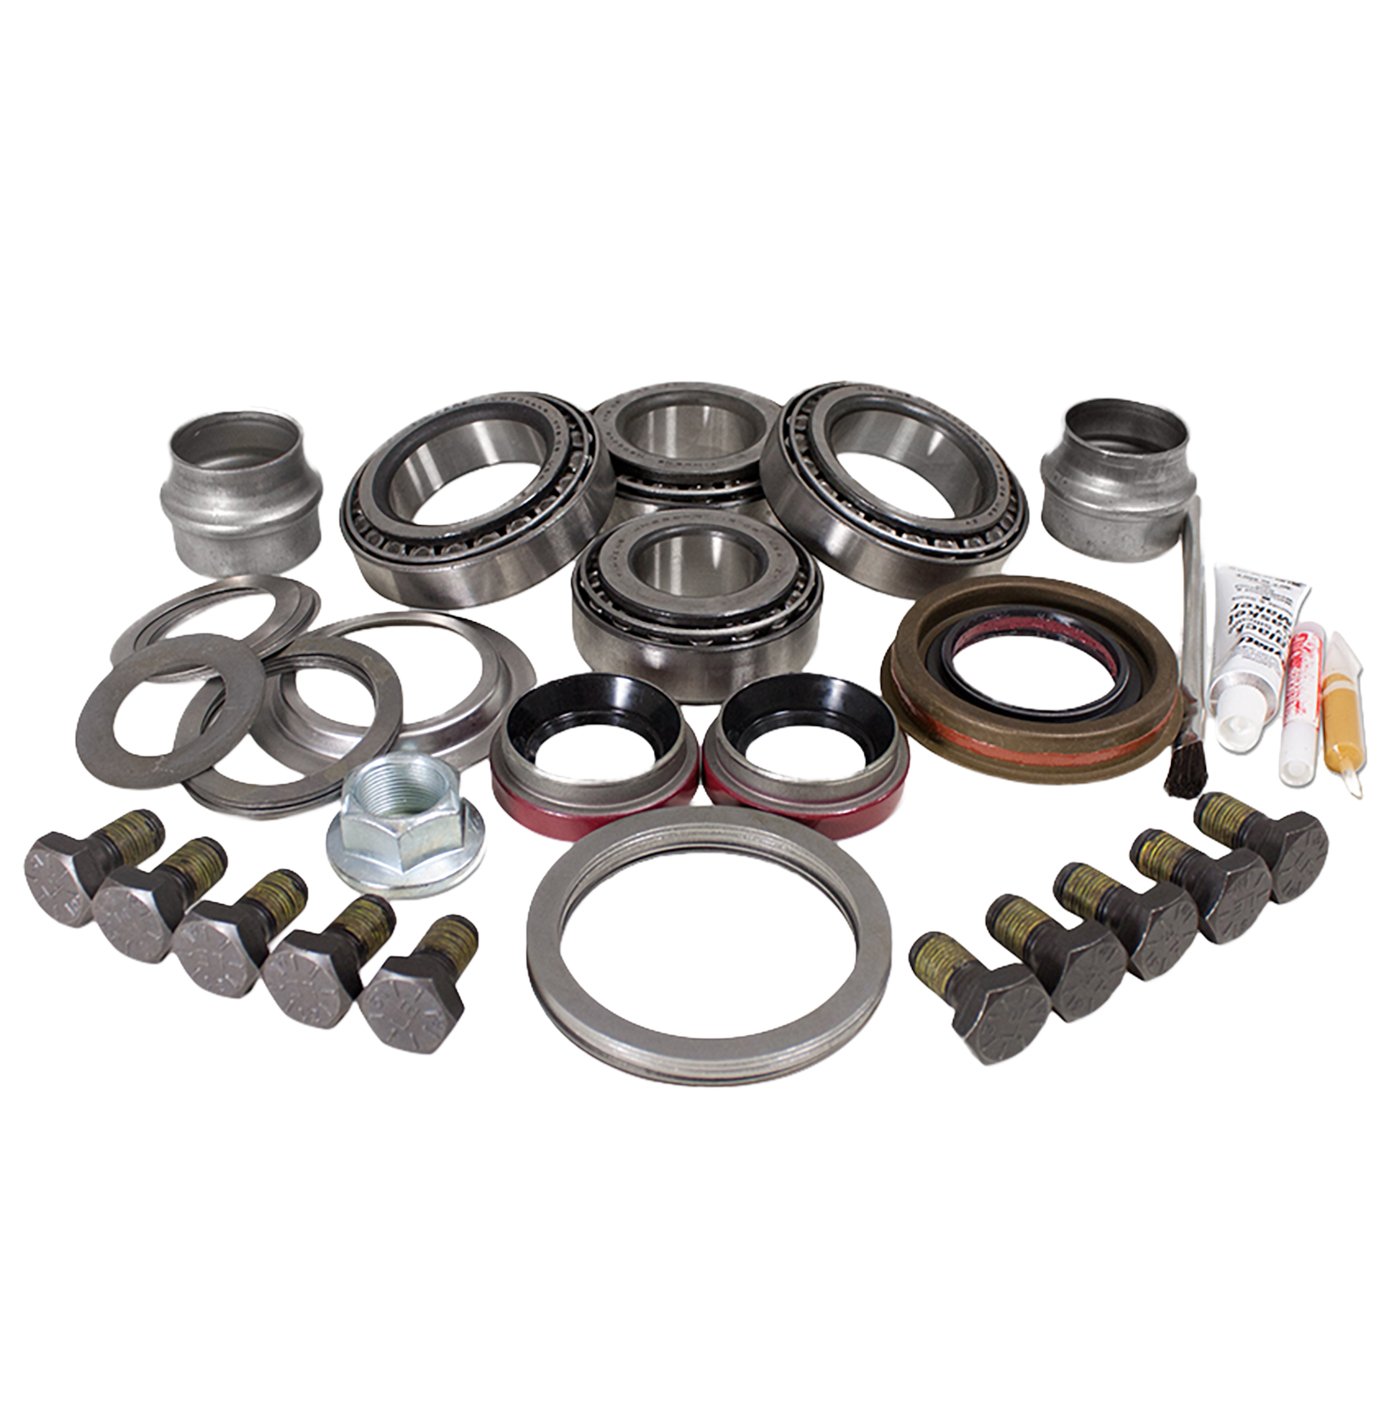 Master Overhaul Kit For Dana 44 Front Differential, '07 & Up Jk Rubicon